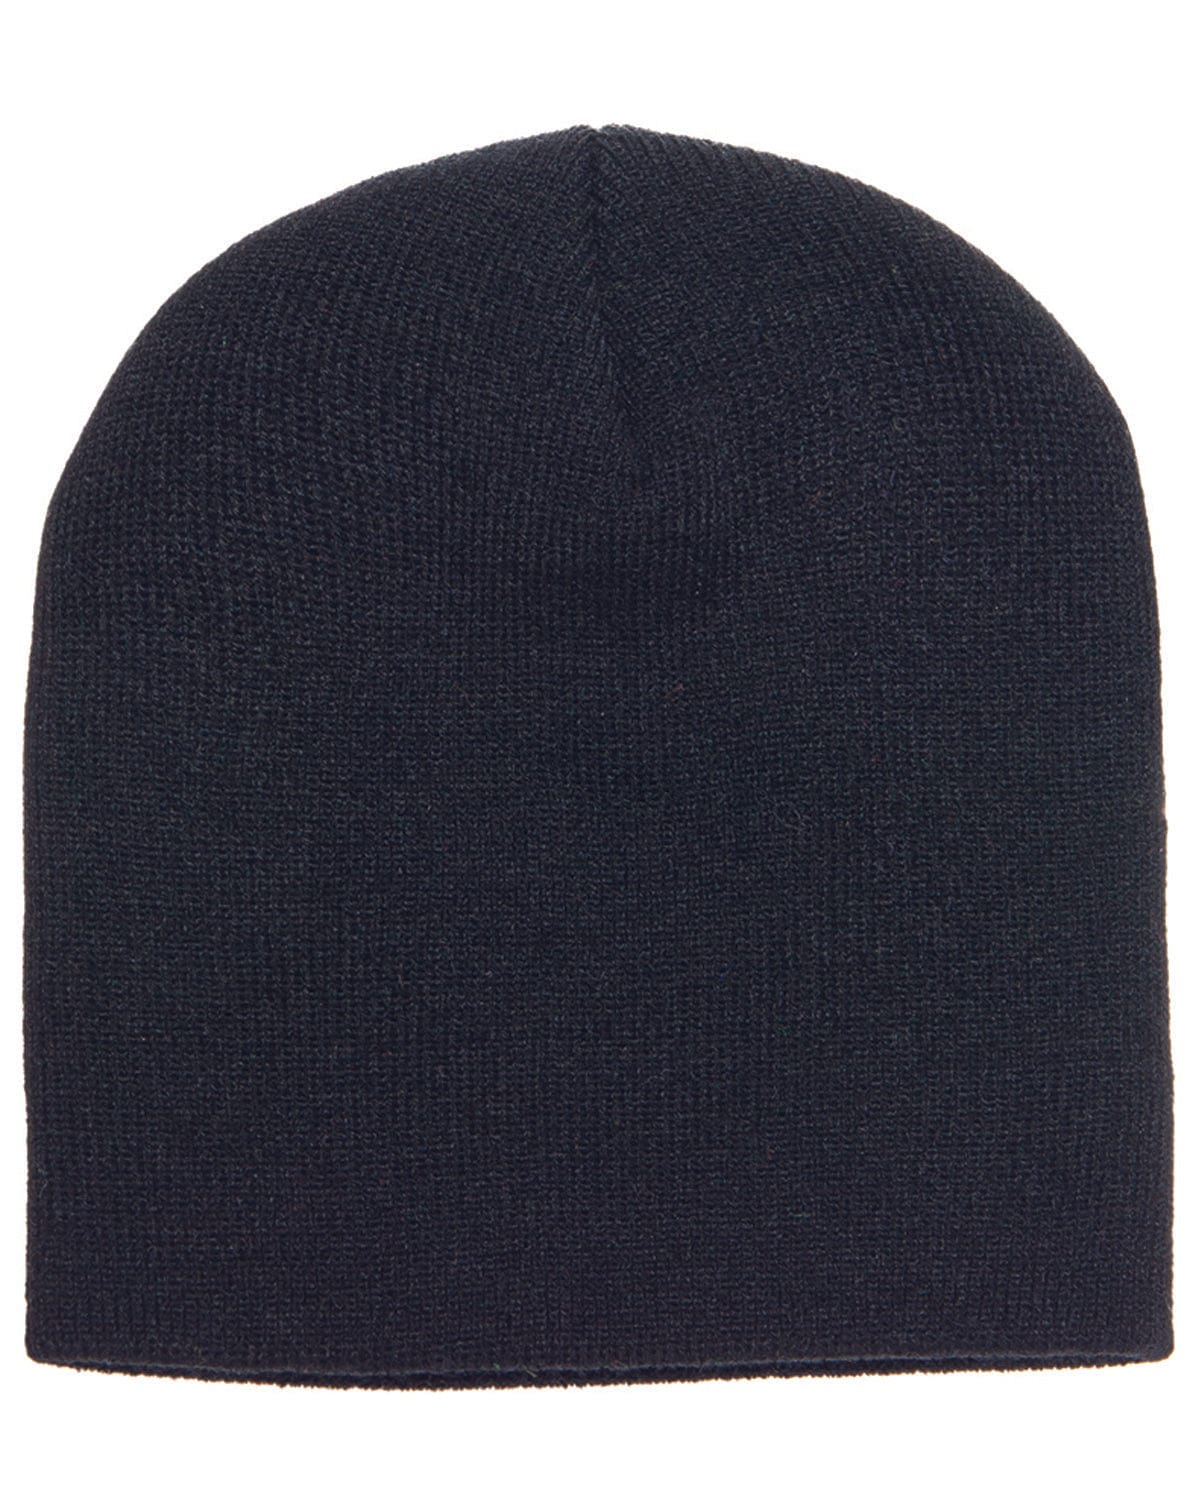 Yupoong 1500: Adult Beanie Knit